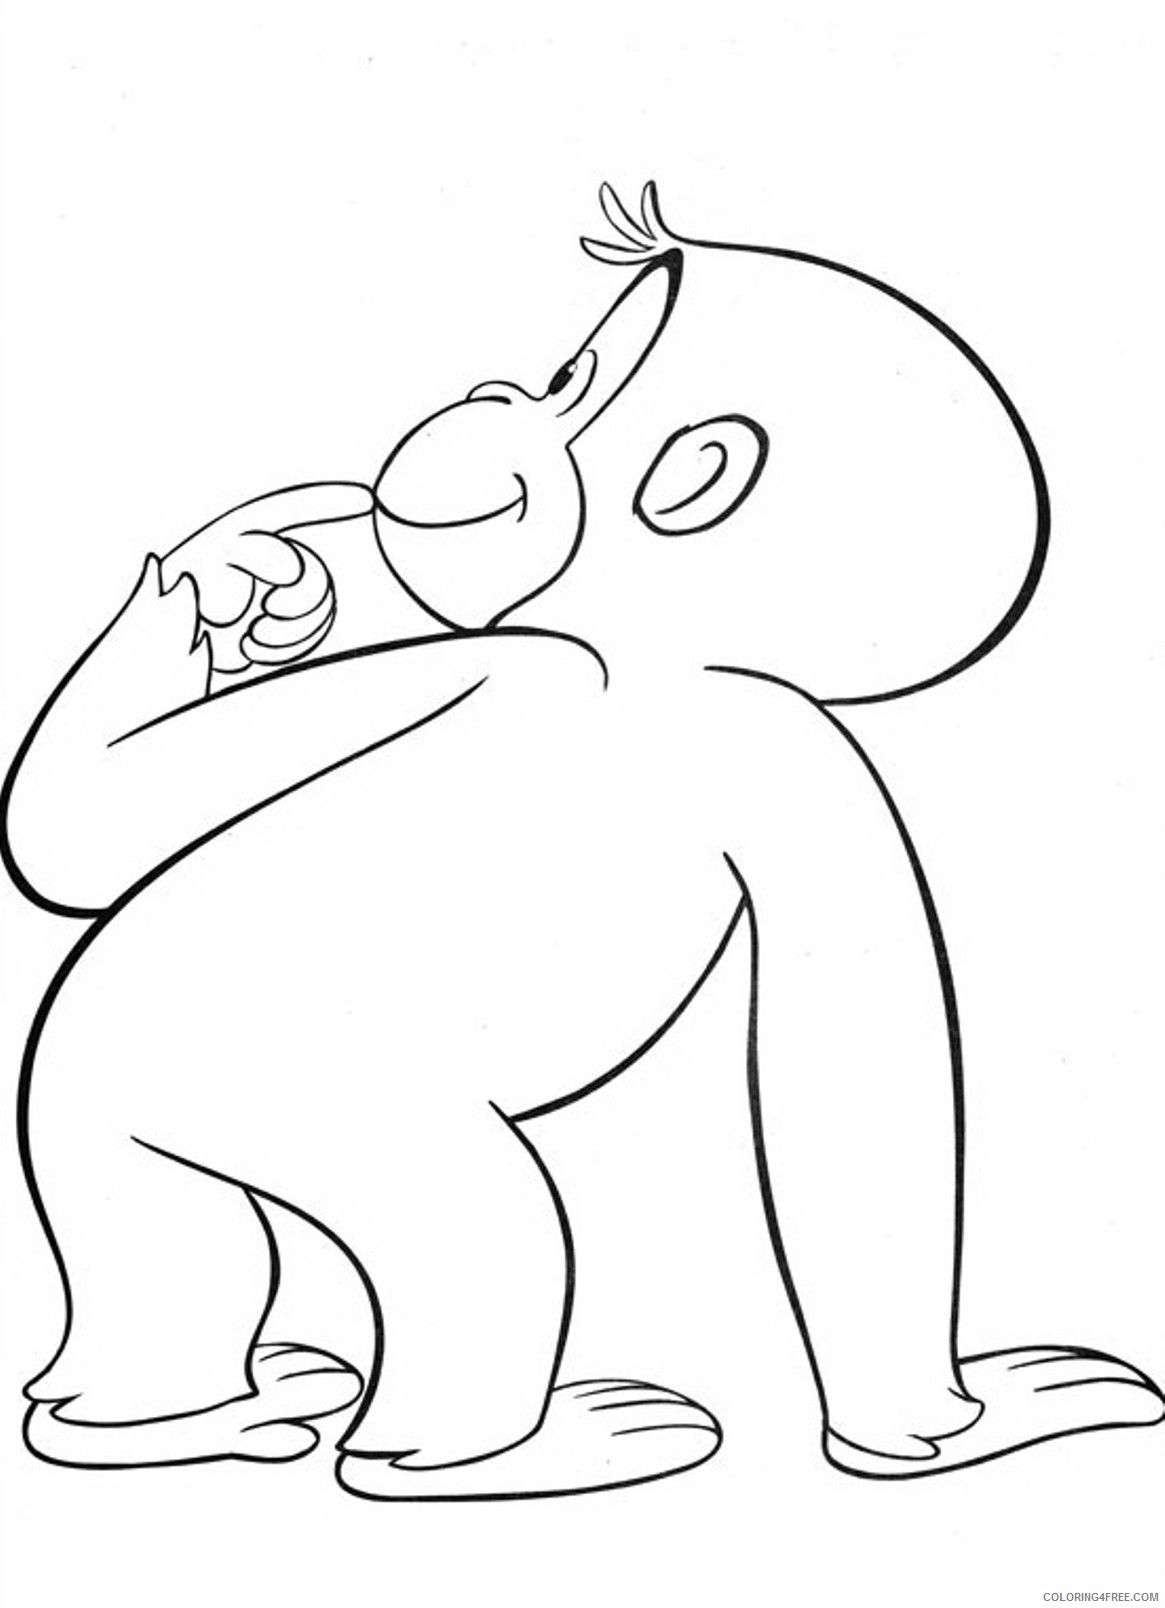 curious george coloring pages to print Coloring4free